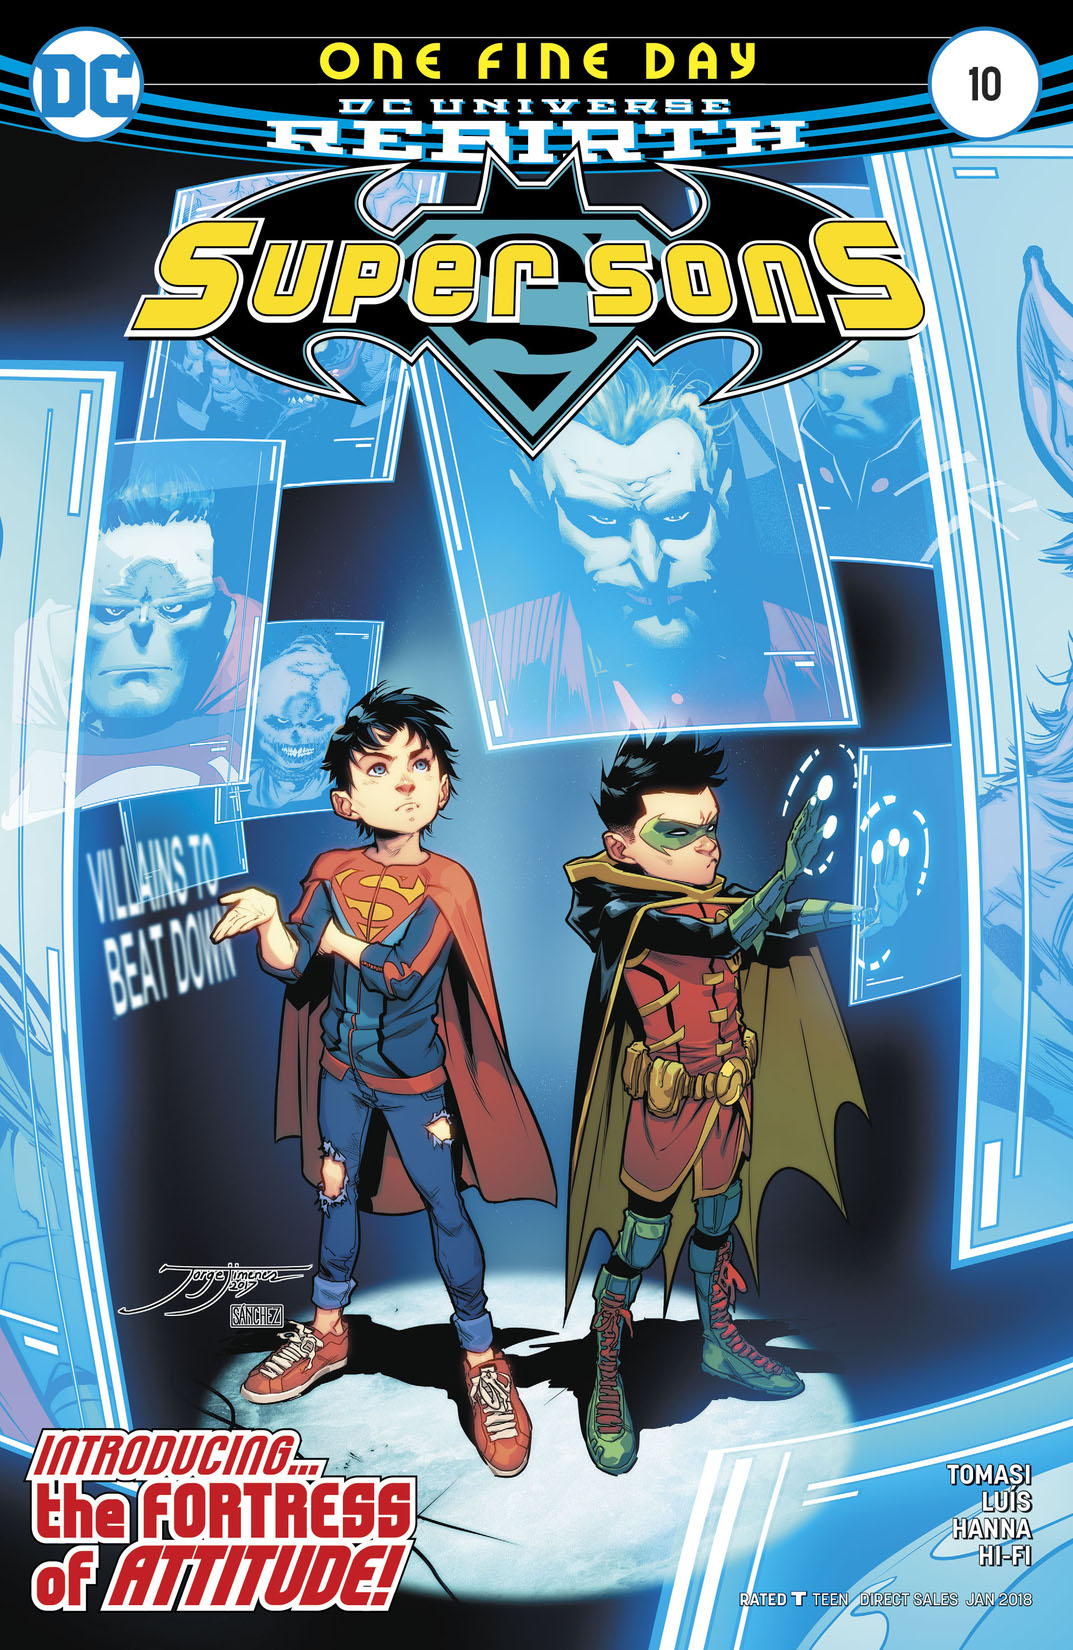 Super Sons (2017-) #10 preview images